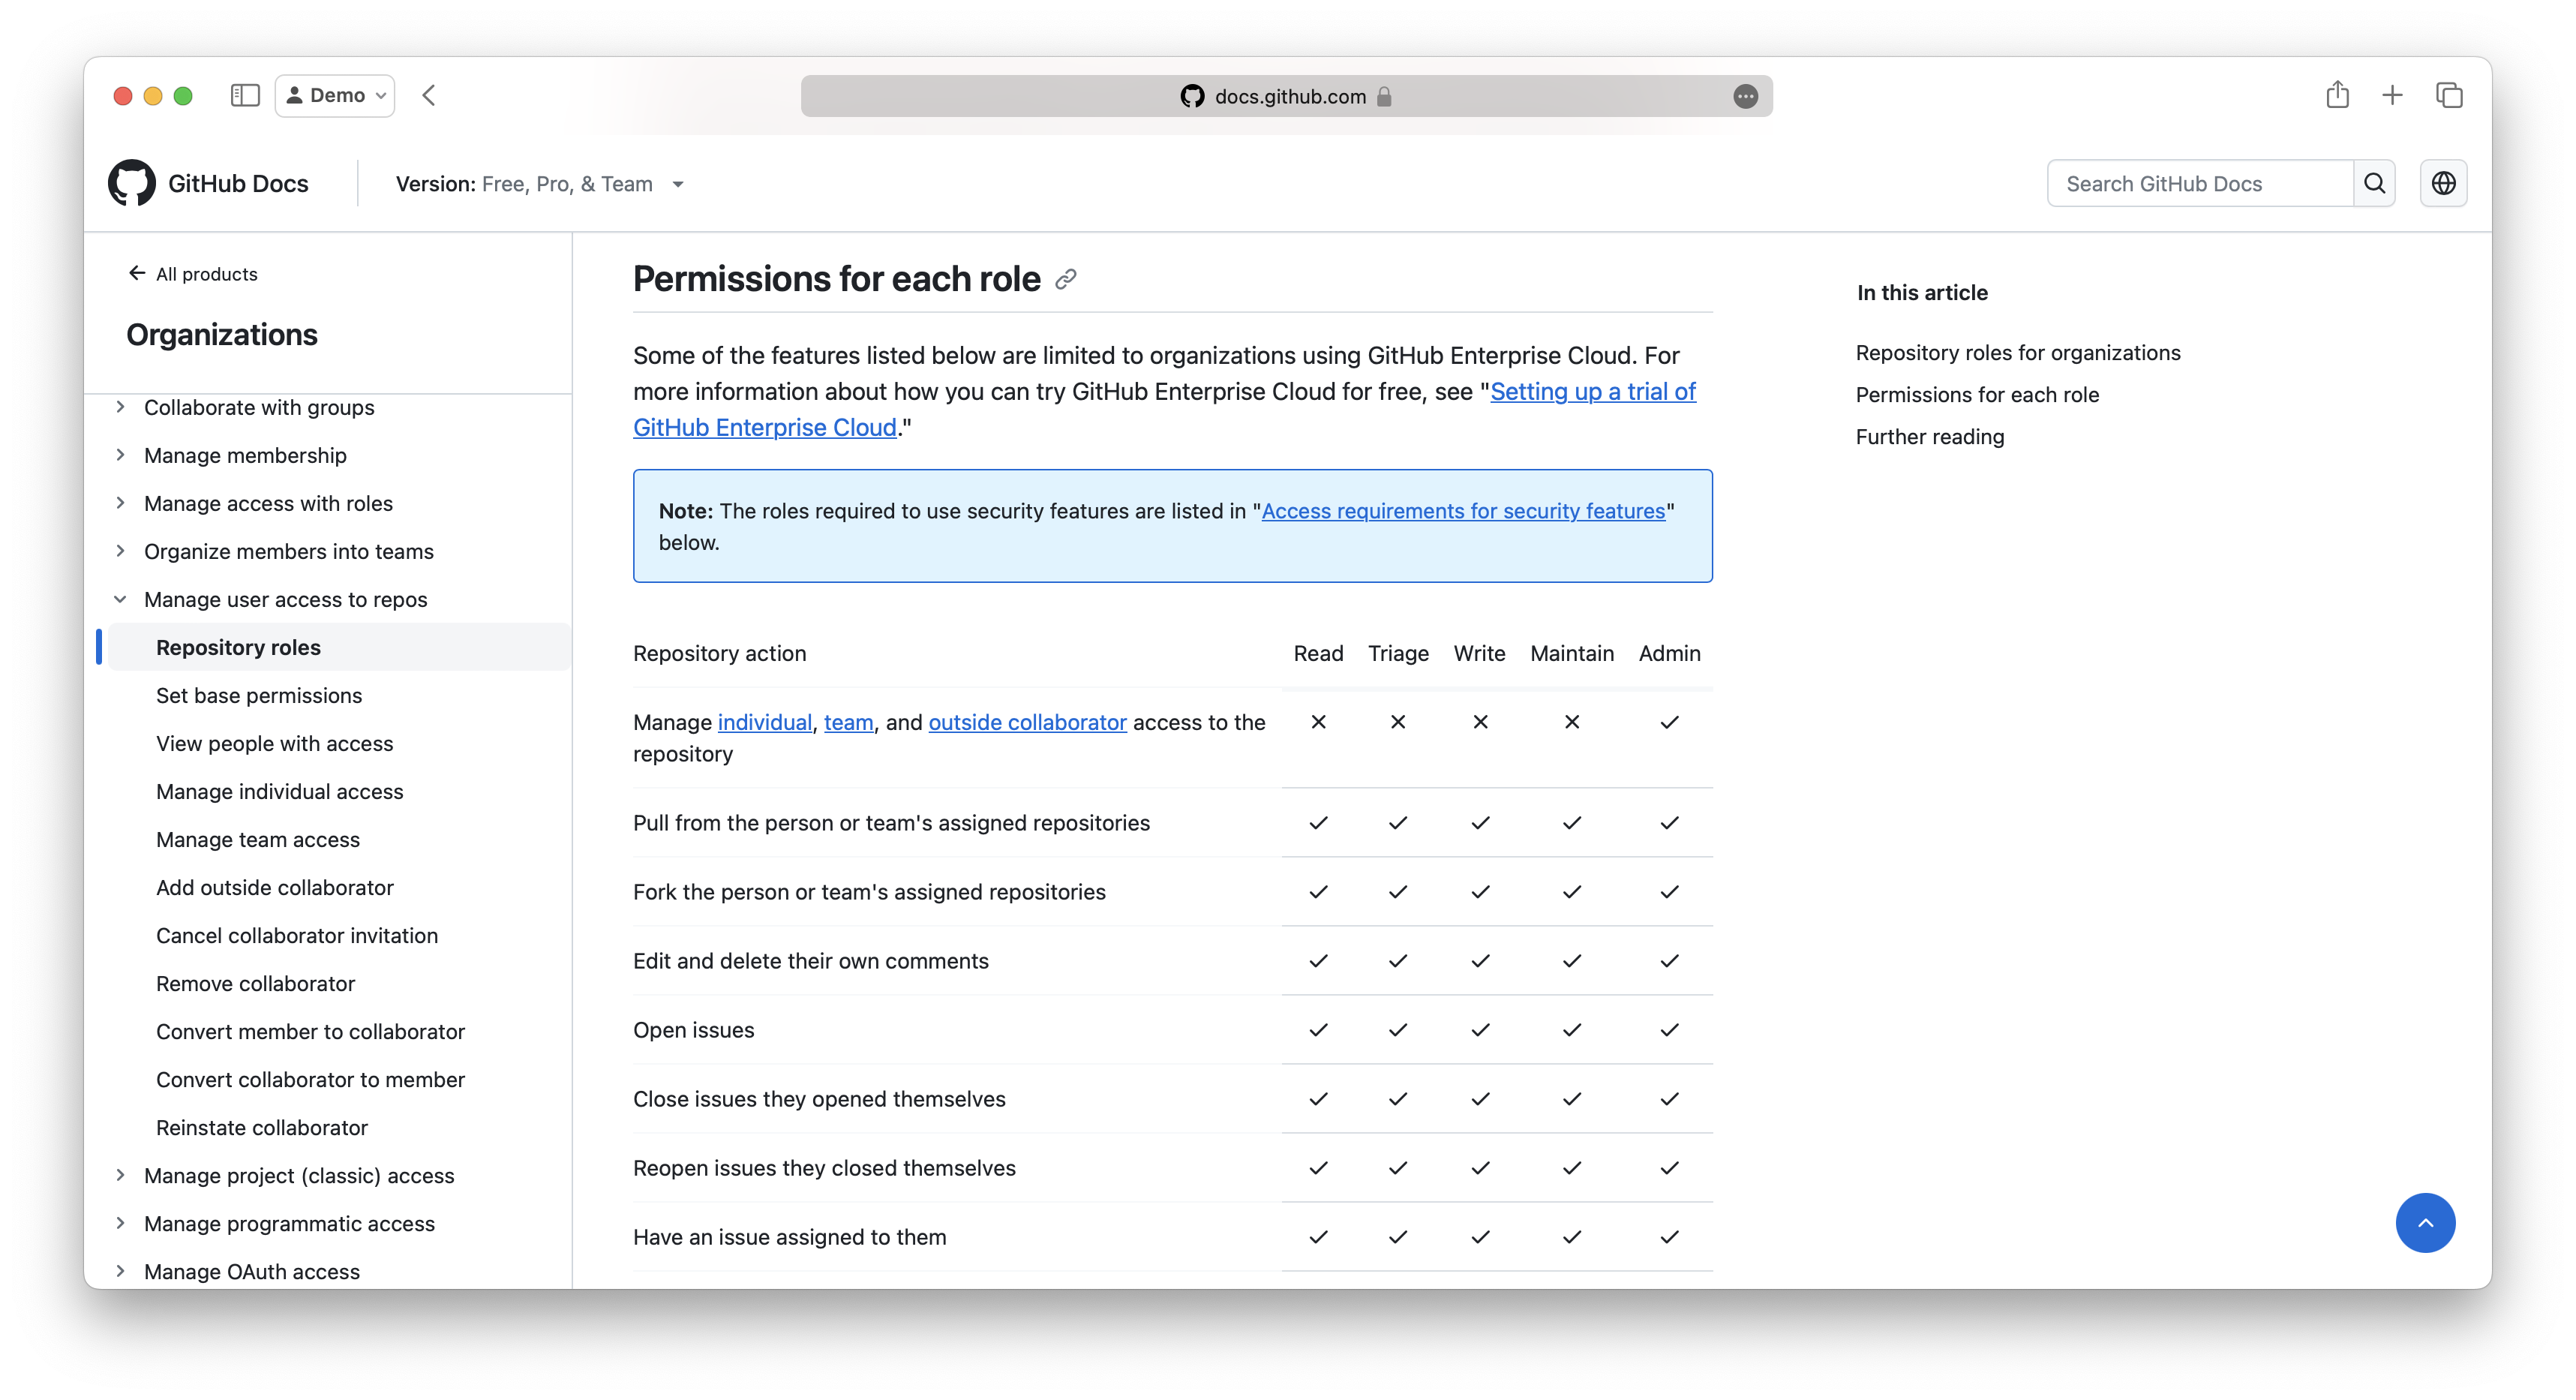 Screenshot of the GitHub Documentation showing available roles